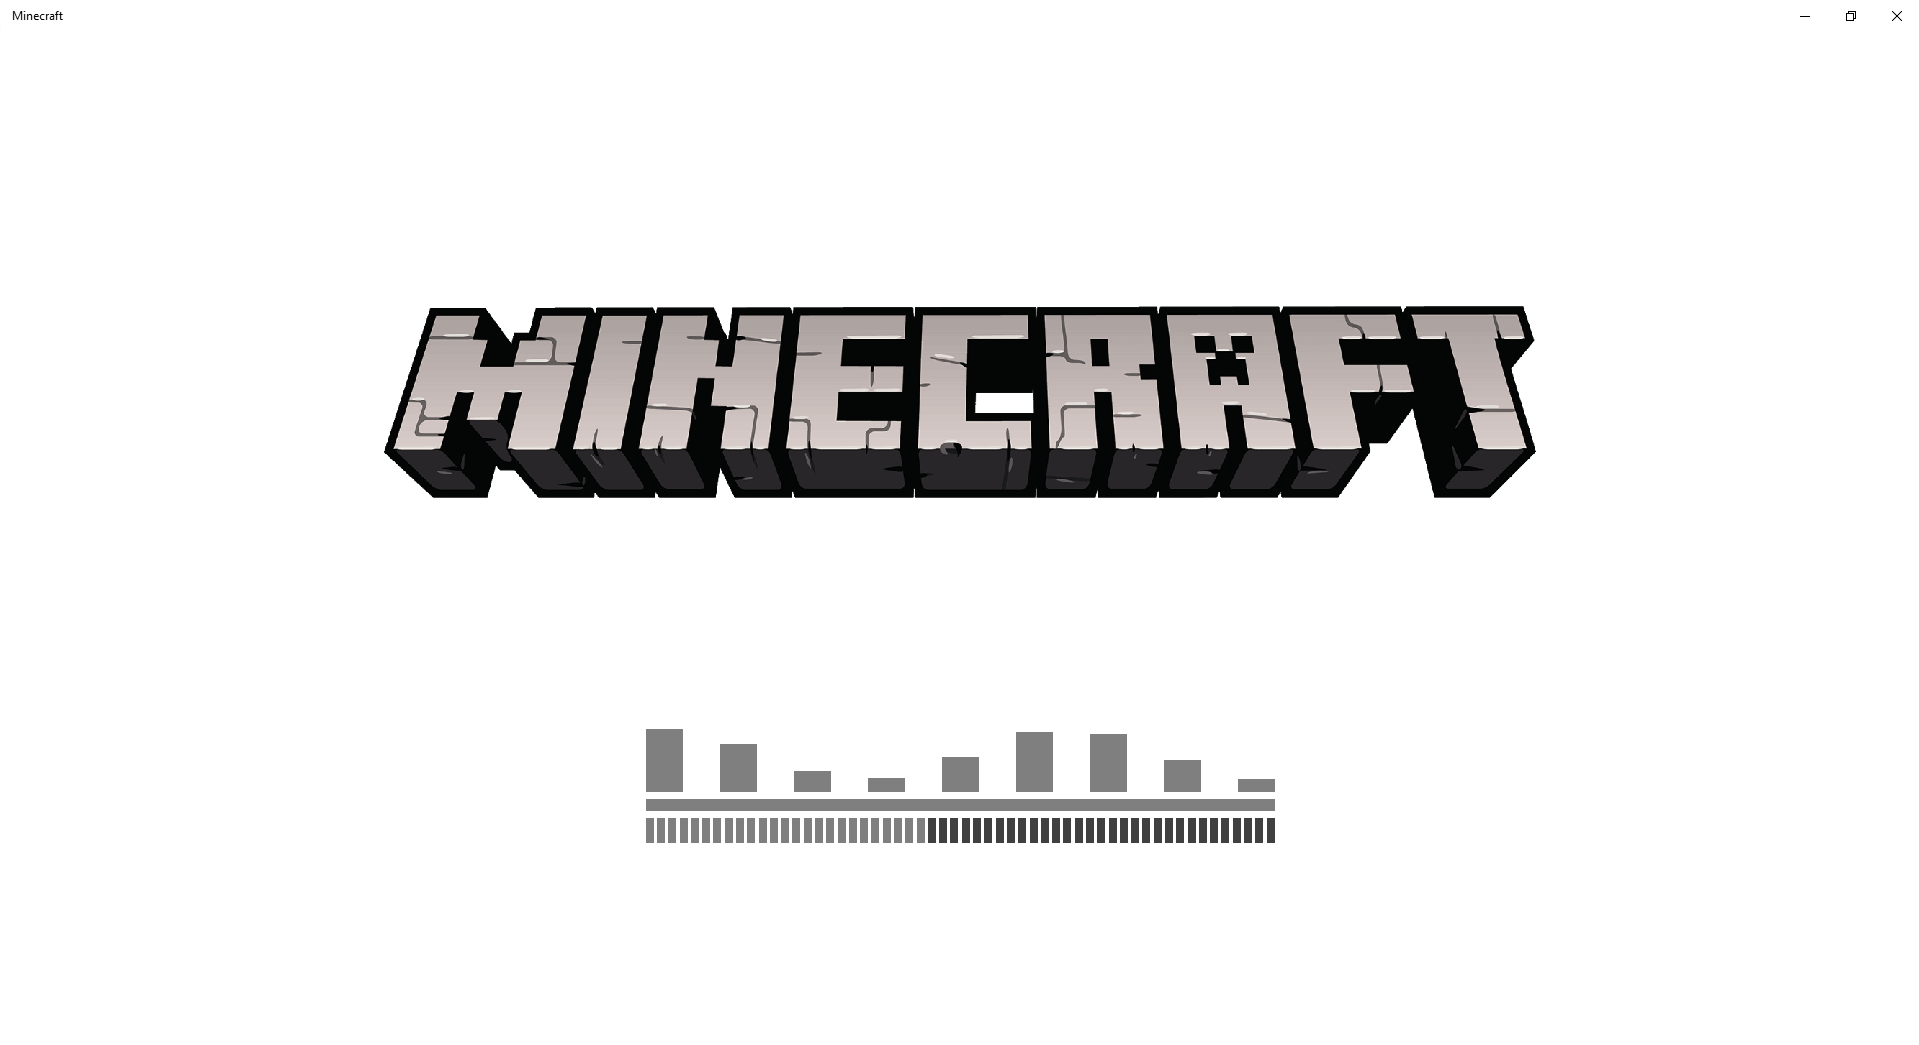 Minecraft windows 10 takes 2 hours to load into main menu d532cd3e-d343-4210-a3ef-80cc57a3cc8d?upload=true.png